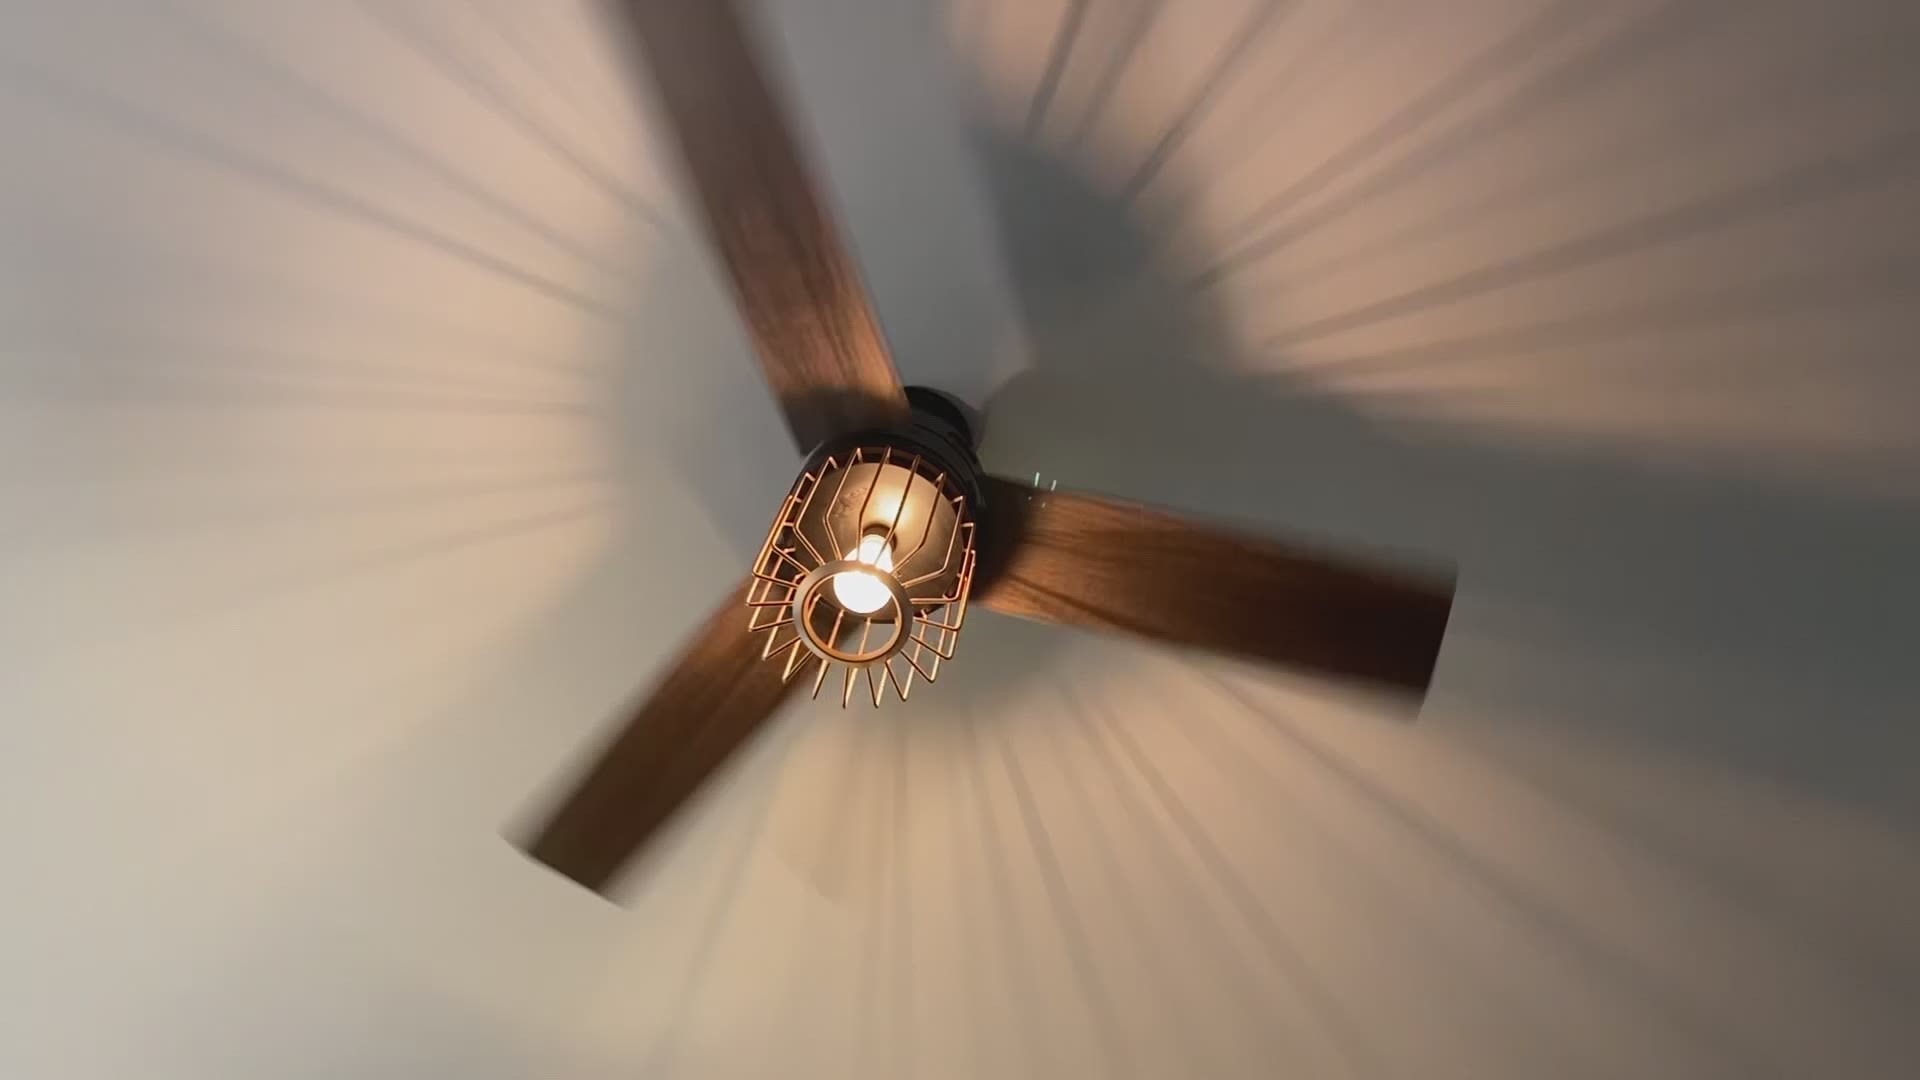 As Consumer Reports explains, choosing the right ceiling fan can help cool off that overheated electric bill.